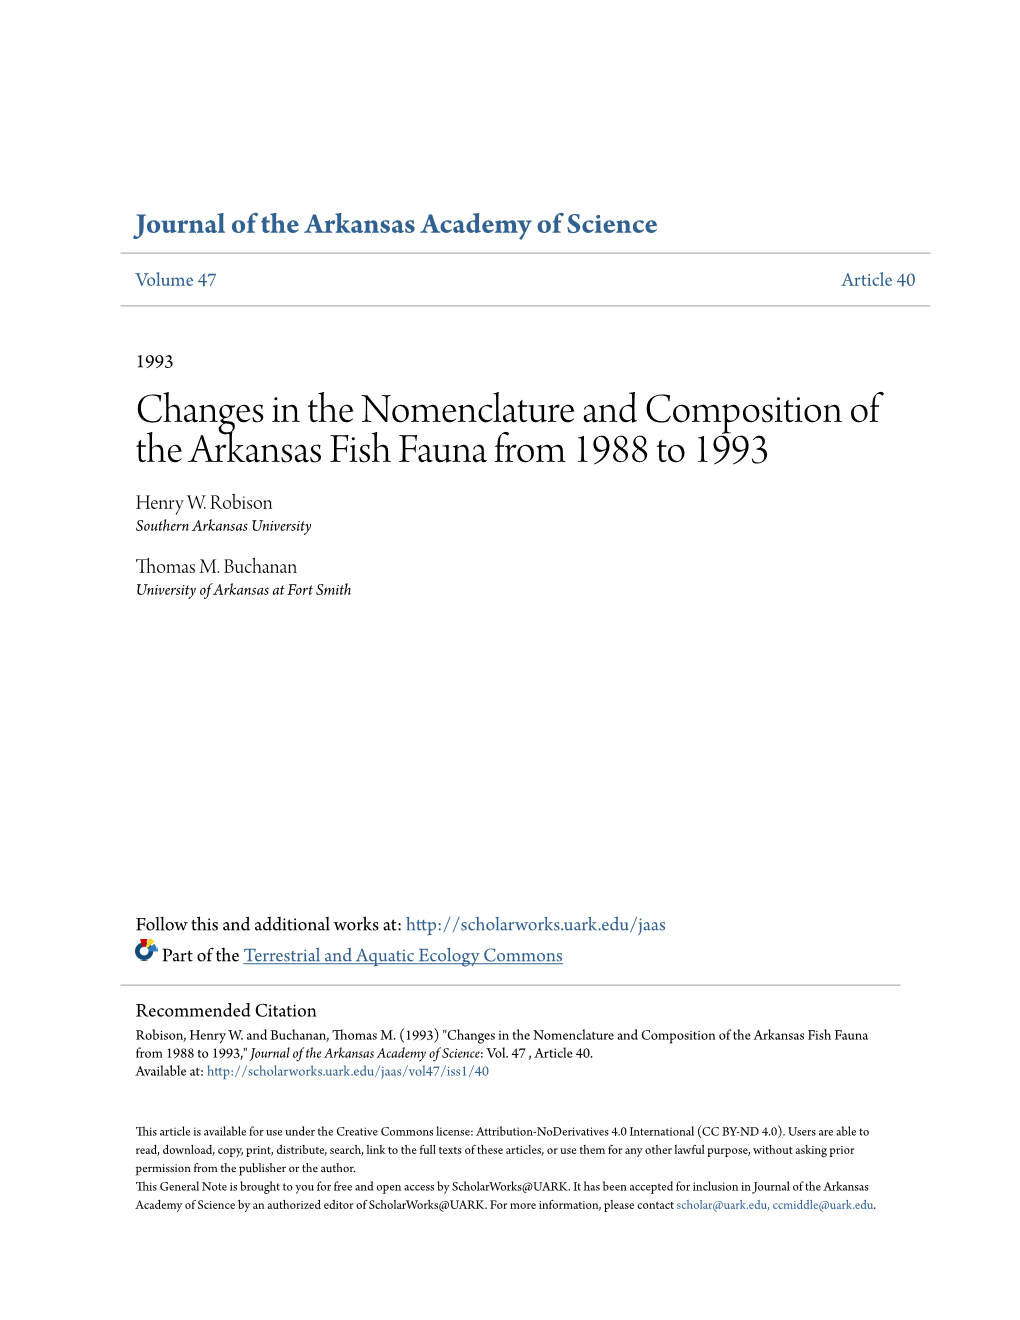 Changes in the Nomenclature and Composition of the Arkansas Fish Fauna from 1988 to 1993 Henry W